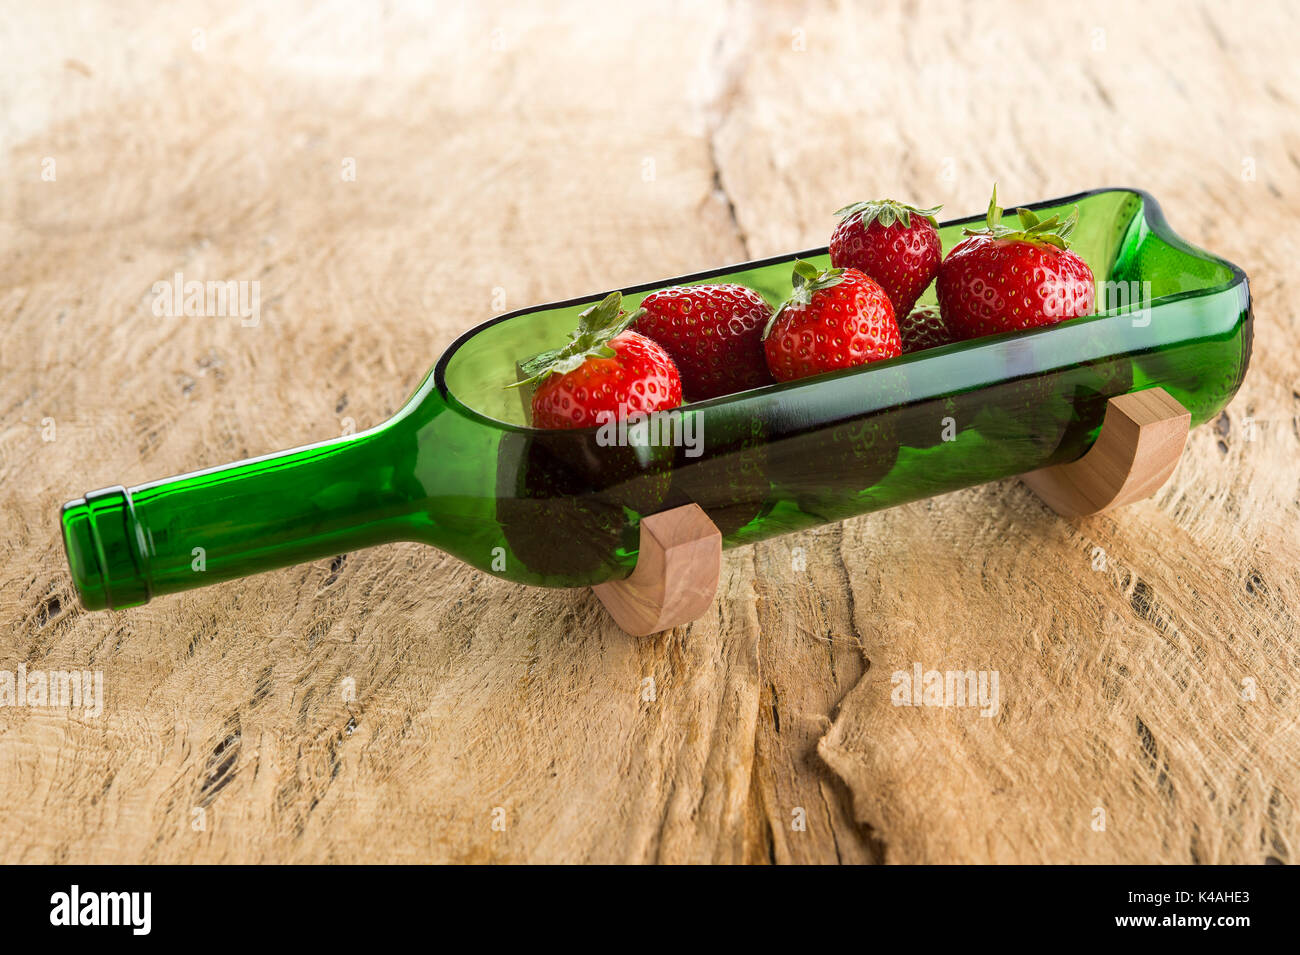 Bottles recycled, sliced open wine bottle on wooden stand, green, decorated with strawberries, on brown wooden plate Stock Photo